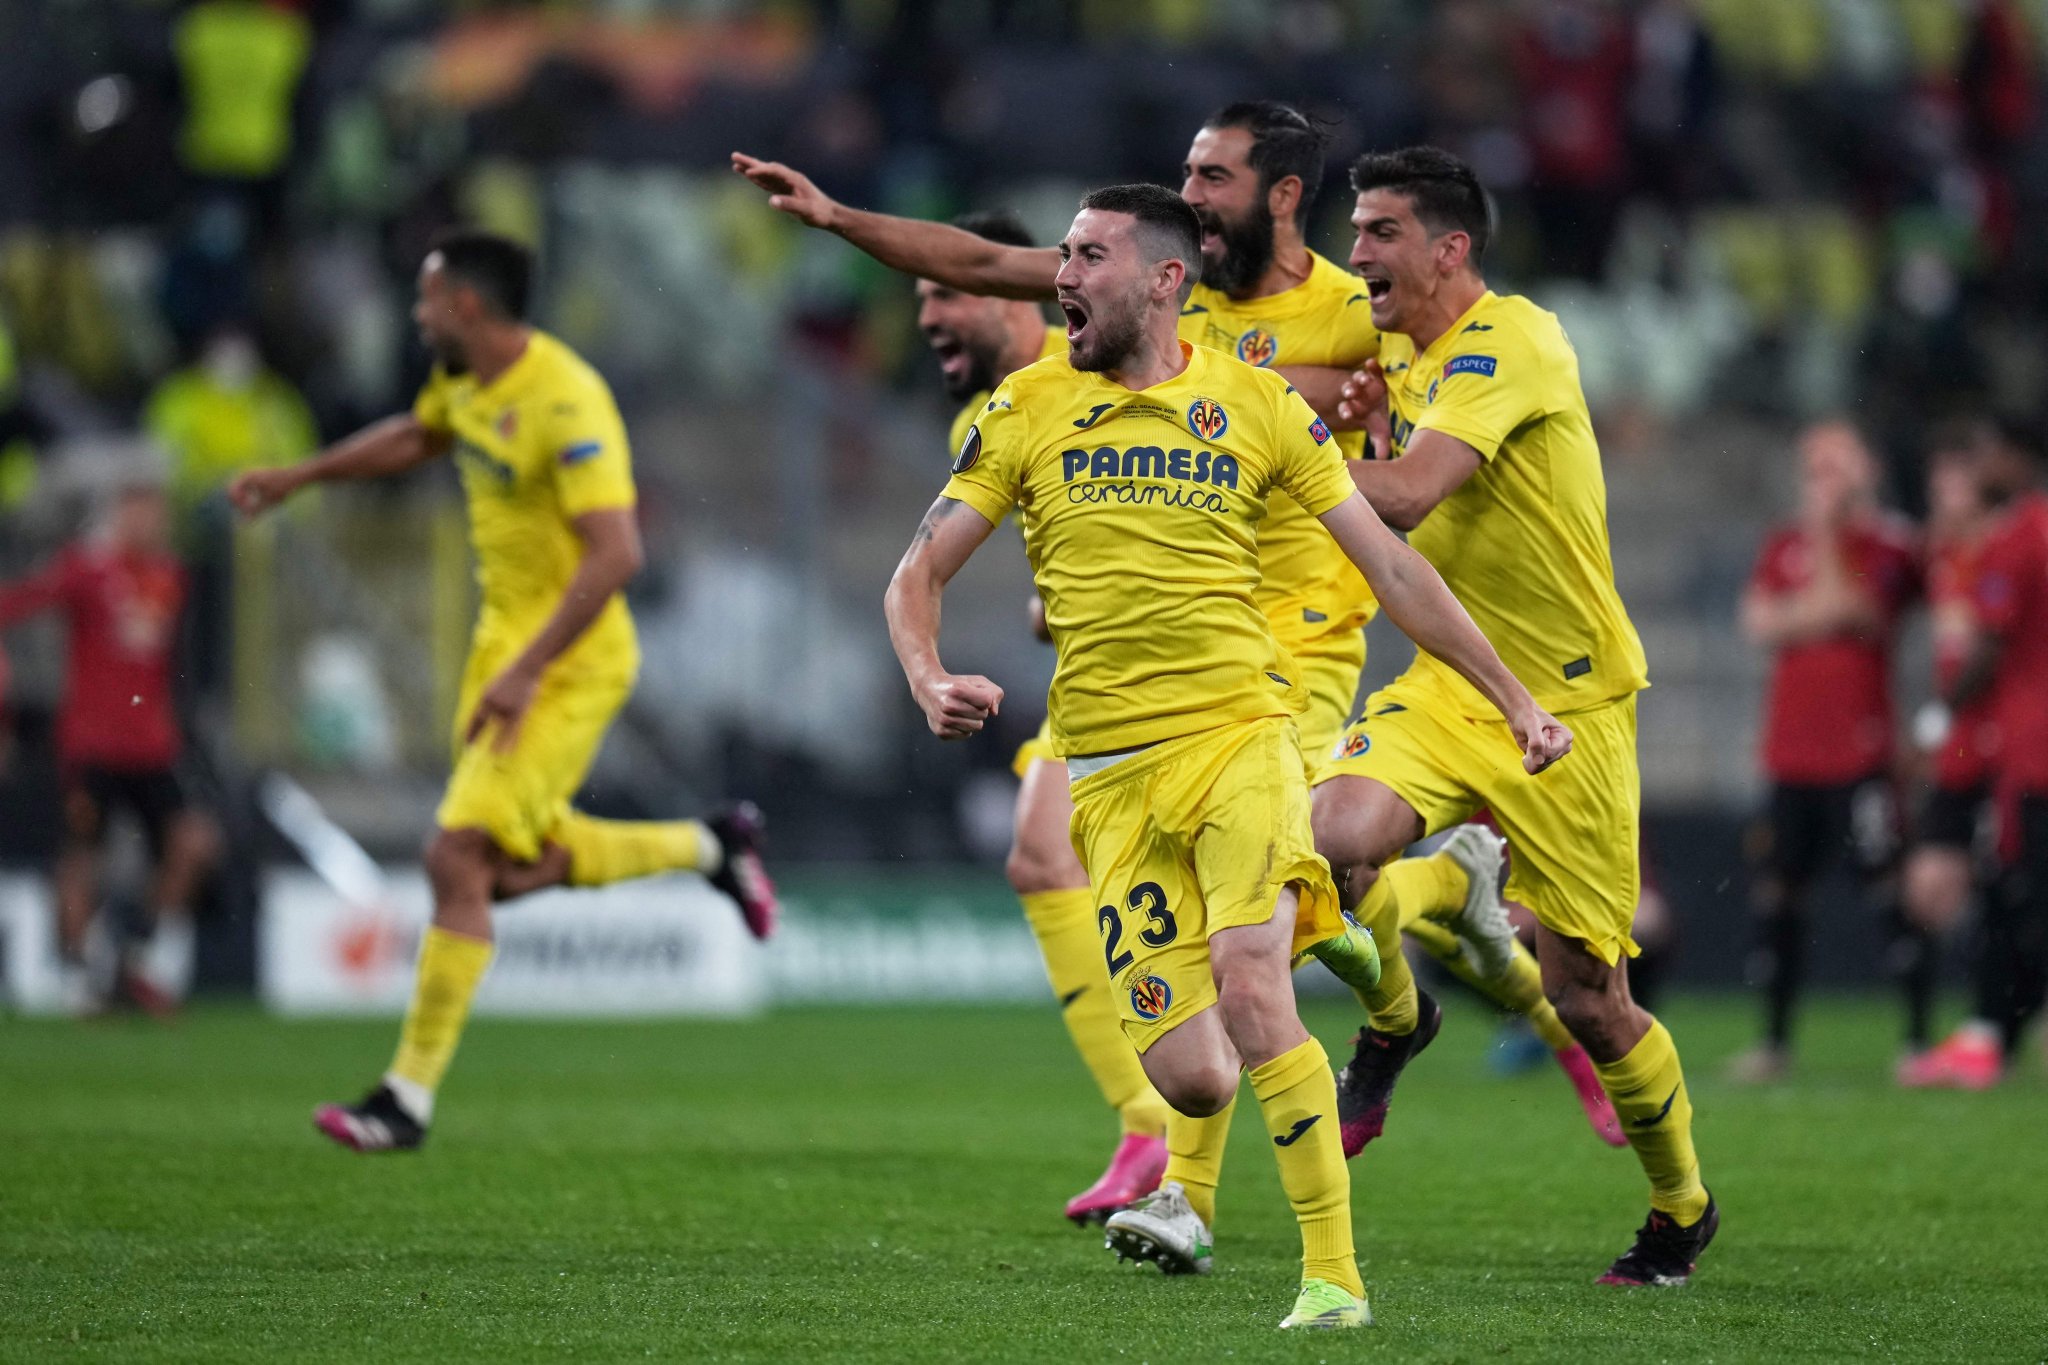 Villarreal Win Europa League By Defeating Manchester United In 11-10 Penalty Shoot-Out